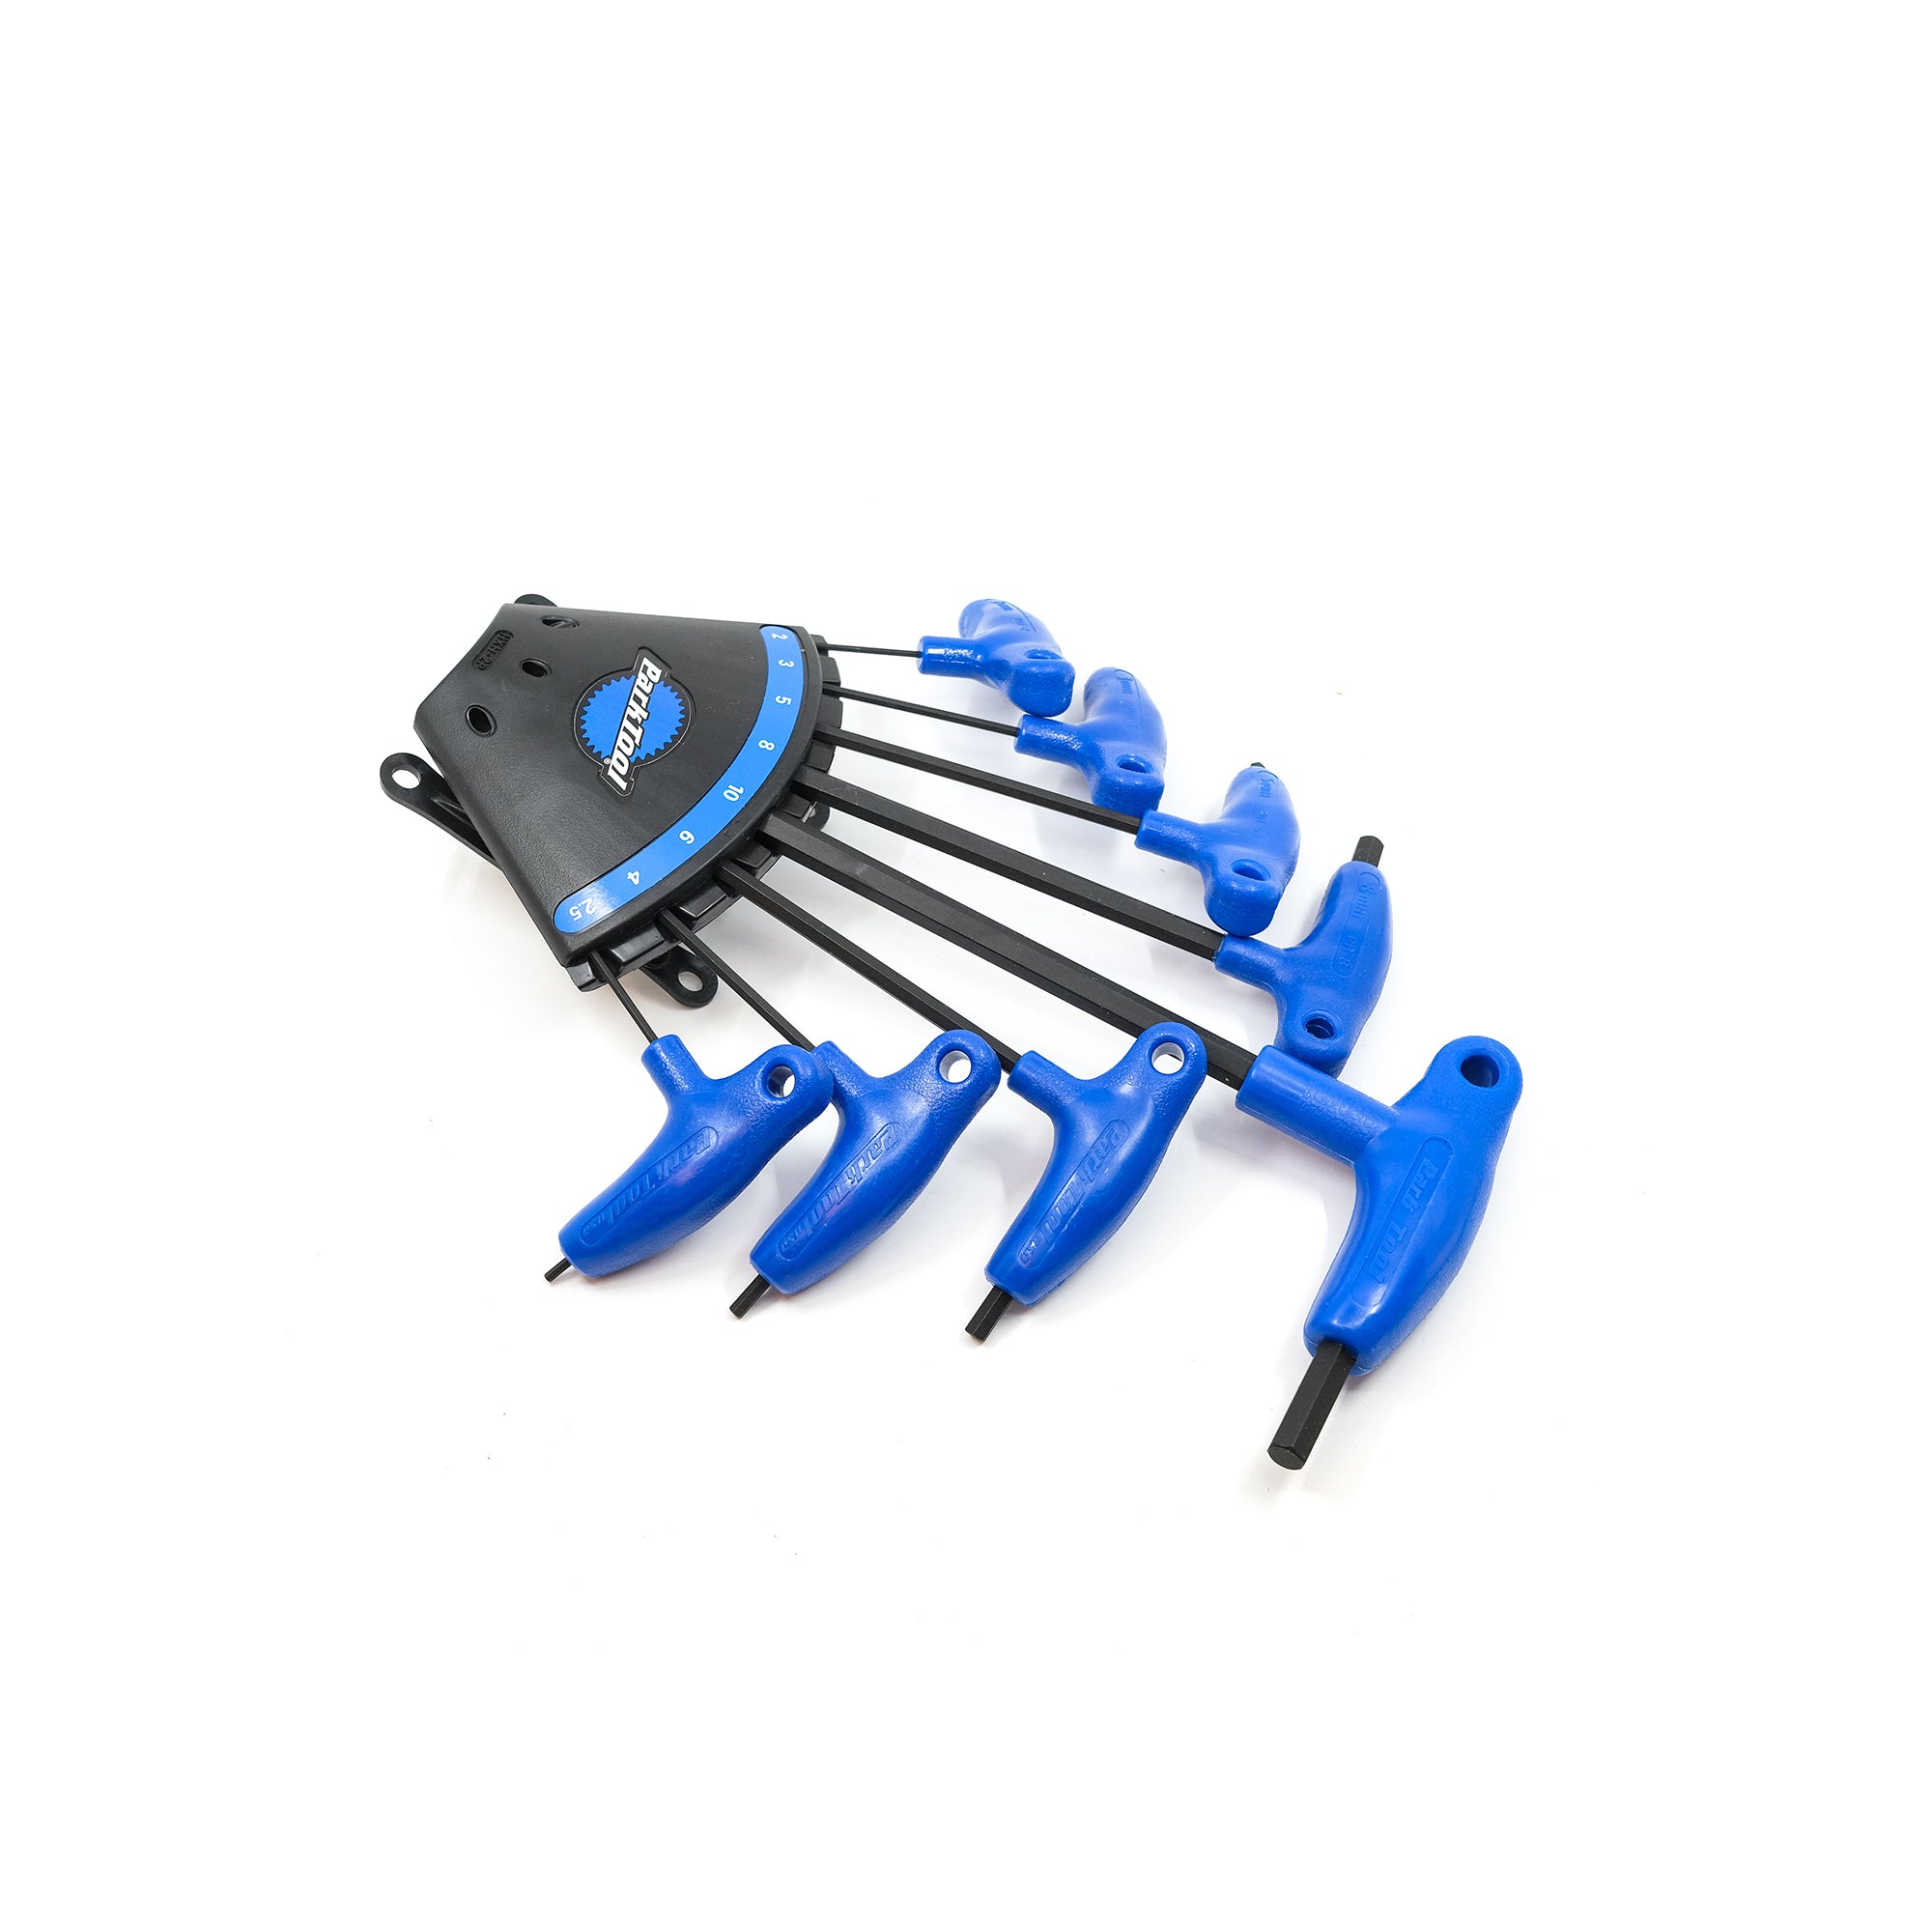 Park Tool PH-1.2 P-Handle Hex Wrench Set – CCACHE